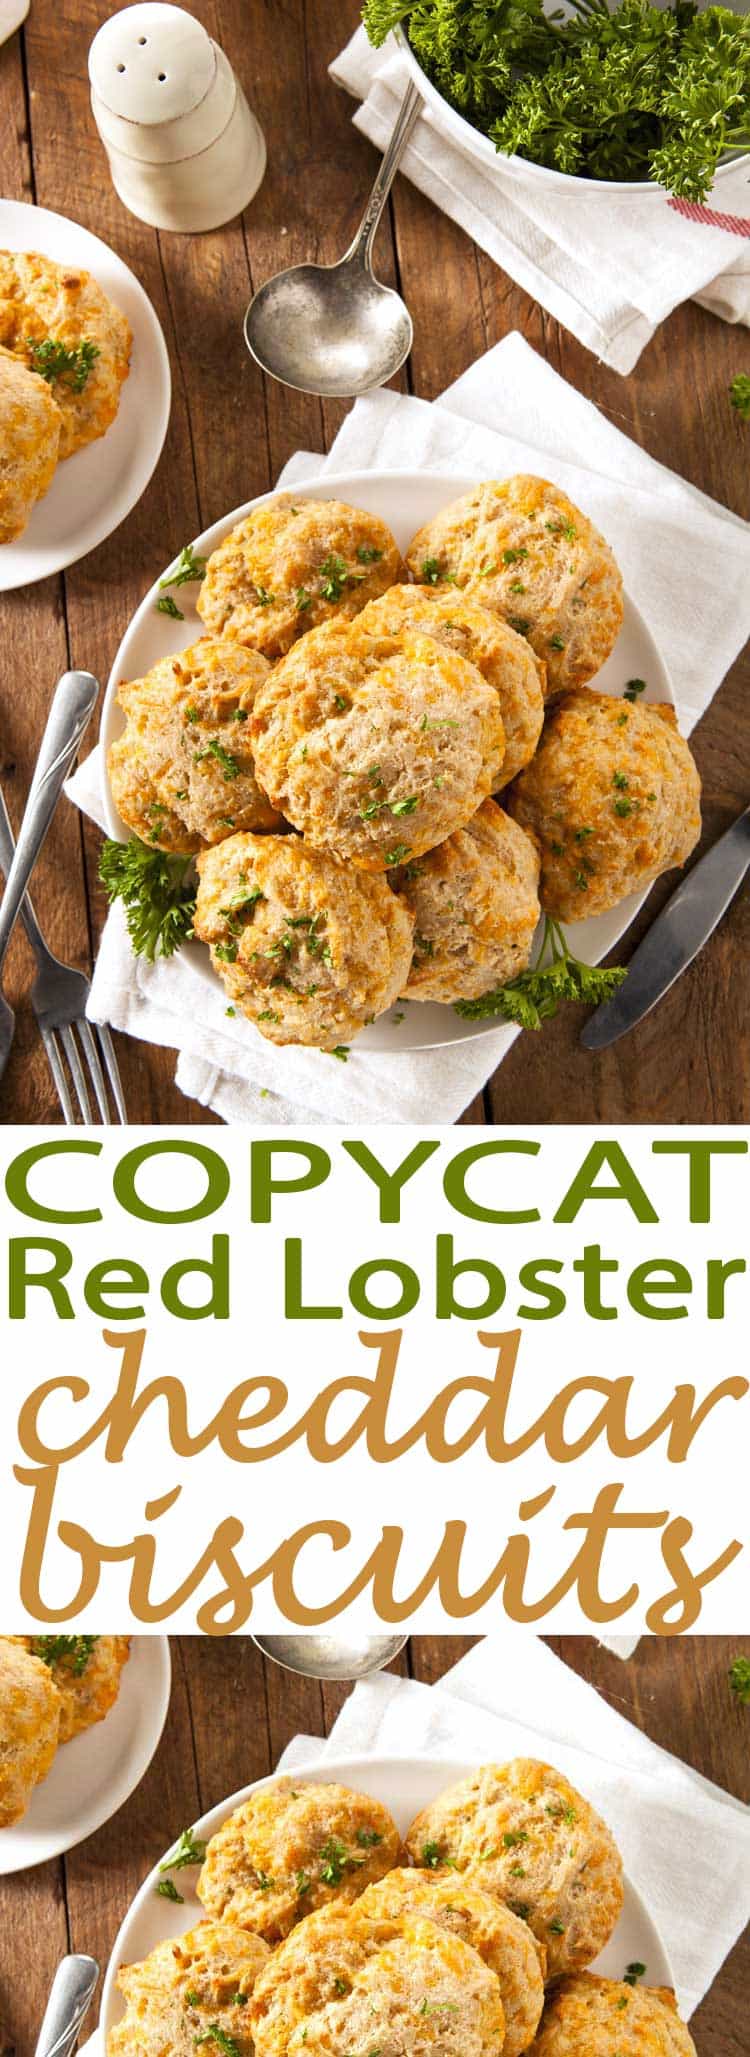 red lobster cheese biscuits on white plate on wood table